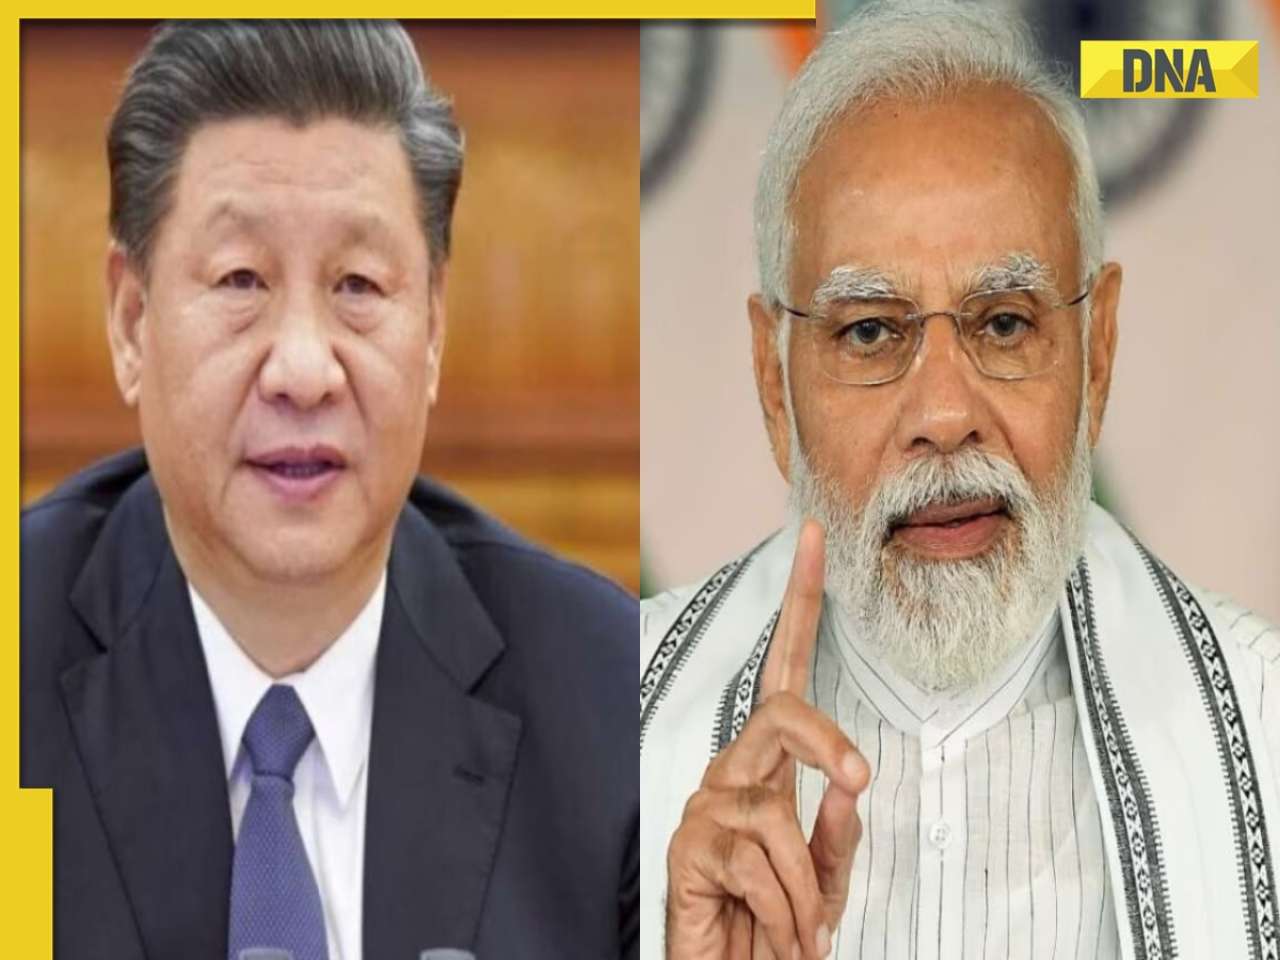 'We hope...': China calls for 'sound and stable relationship' with India amid border tensions